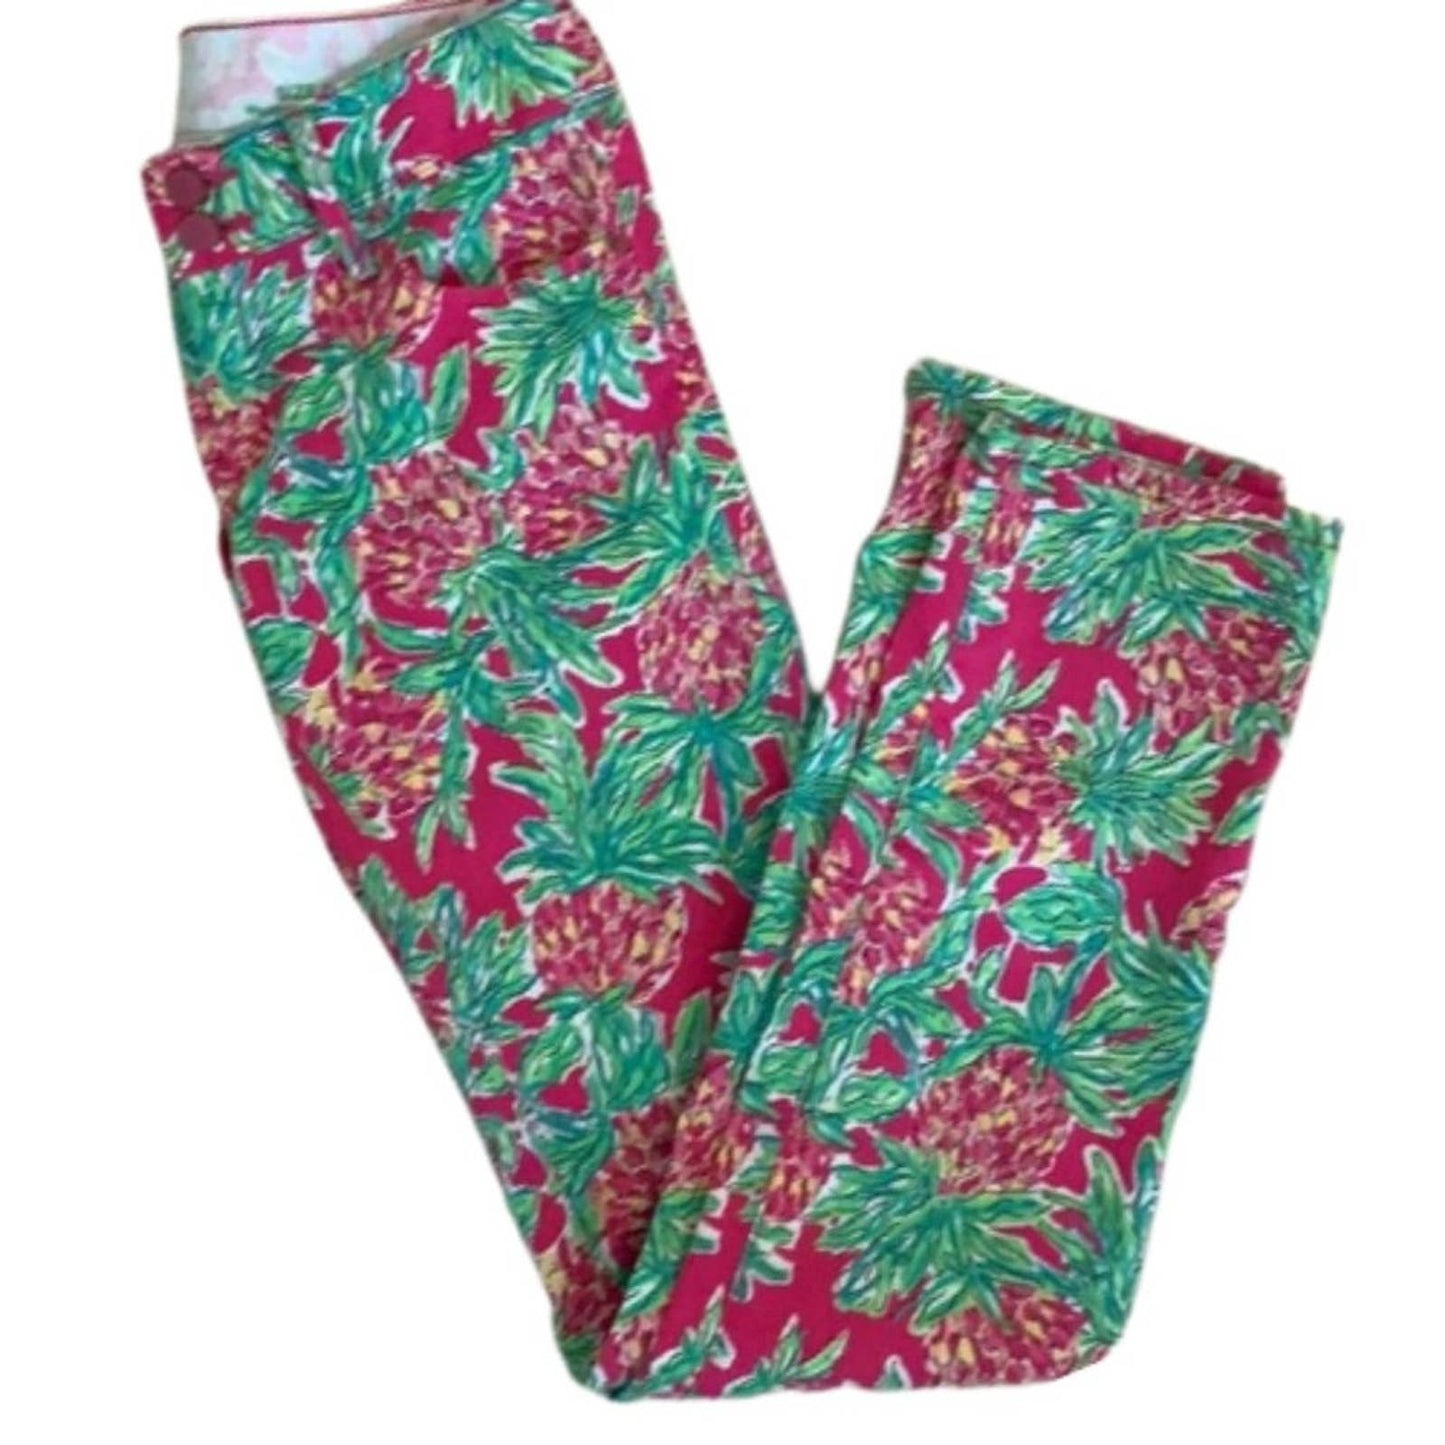 Lilly Pulitzer Worth Straight Leg Jeans in Hot Pink Pineapple Print EUC Size 00